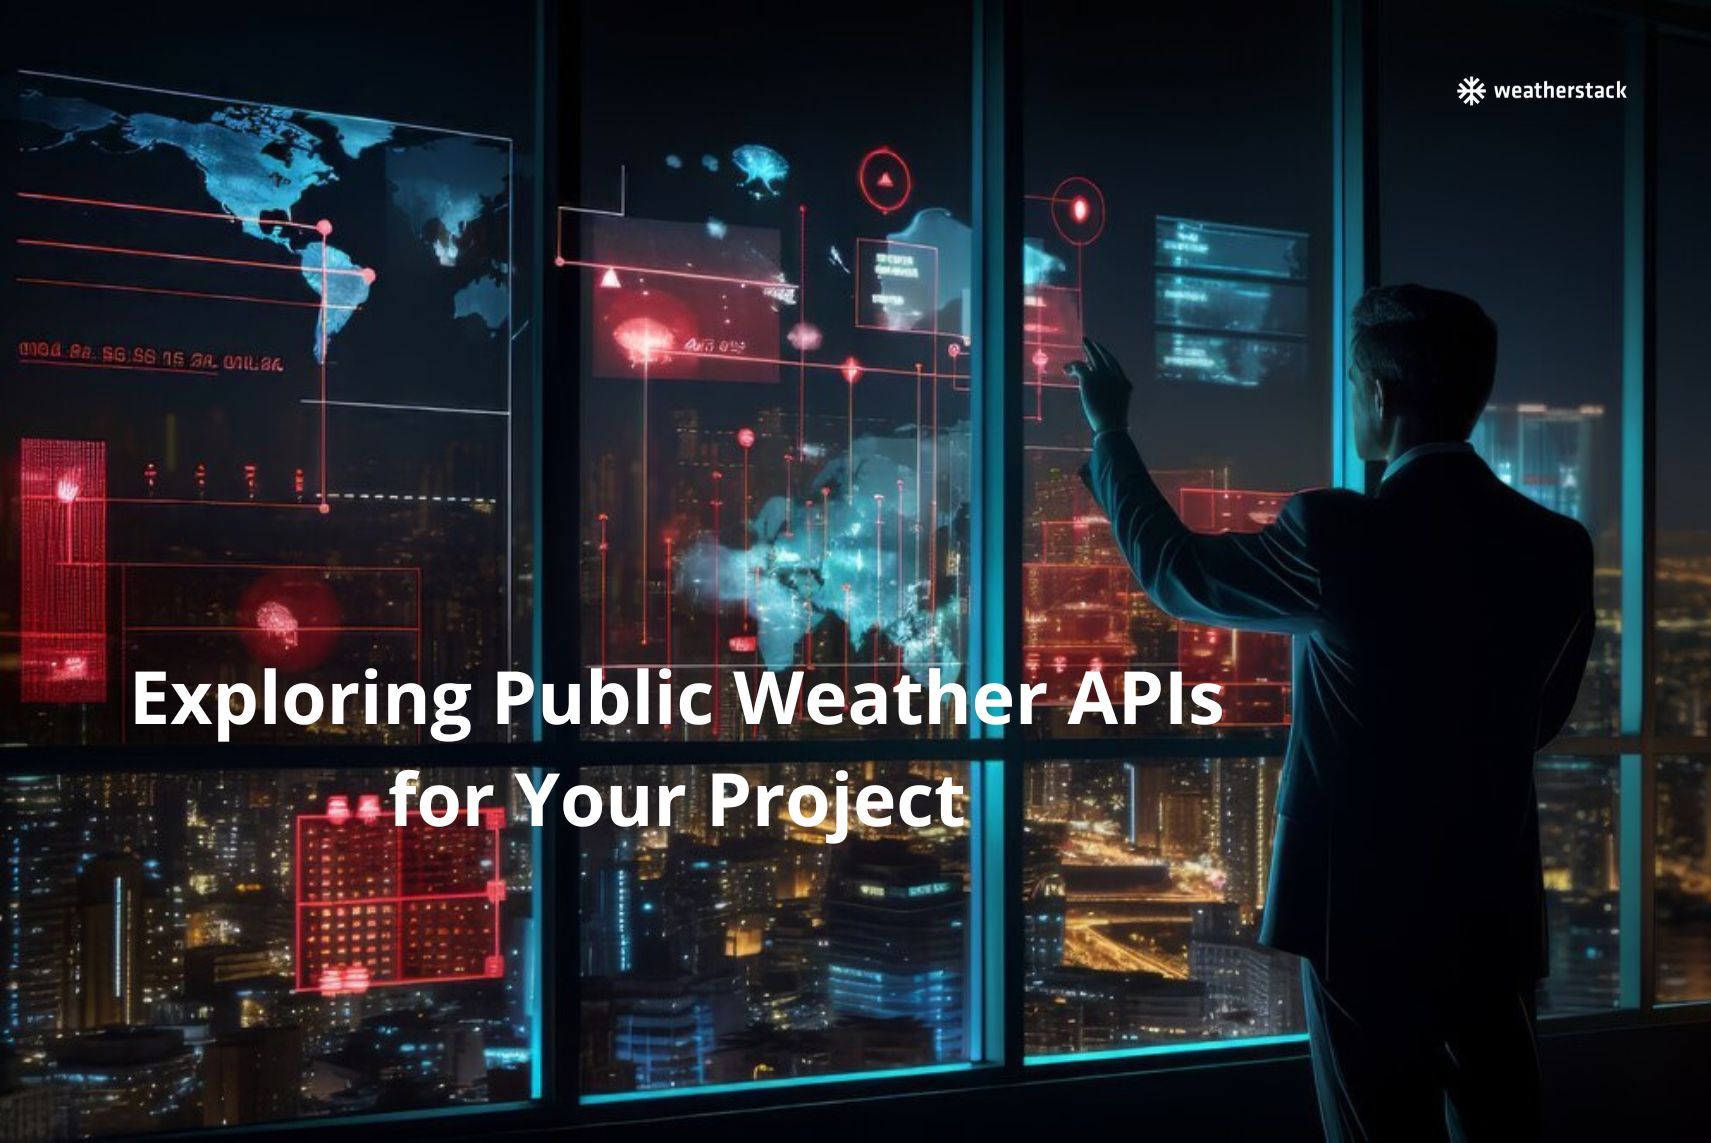 Exploring Public Weather APIs for Your Project